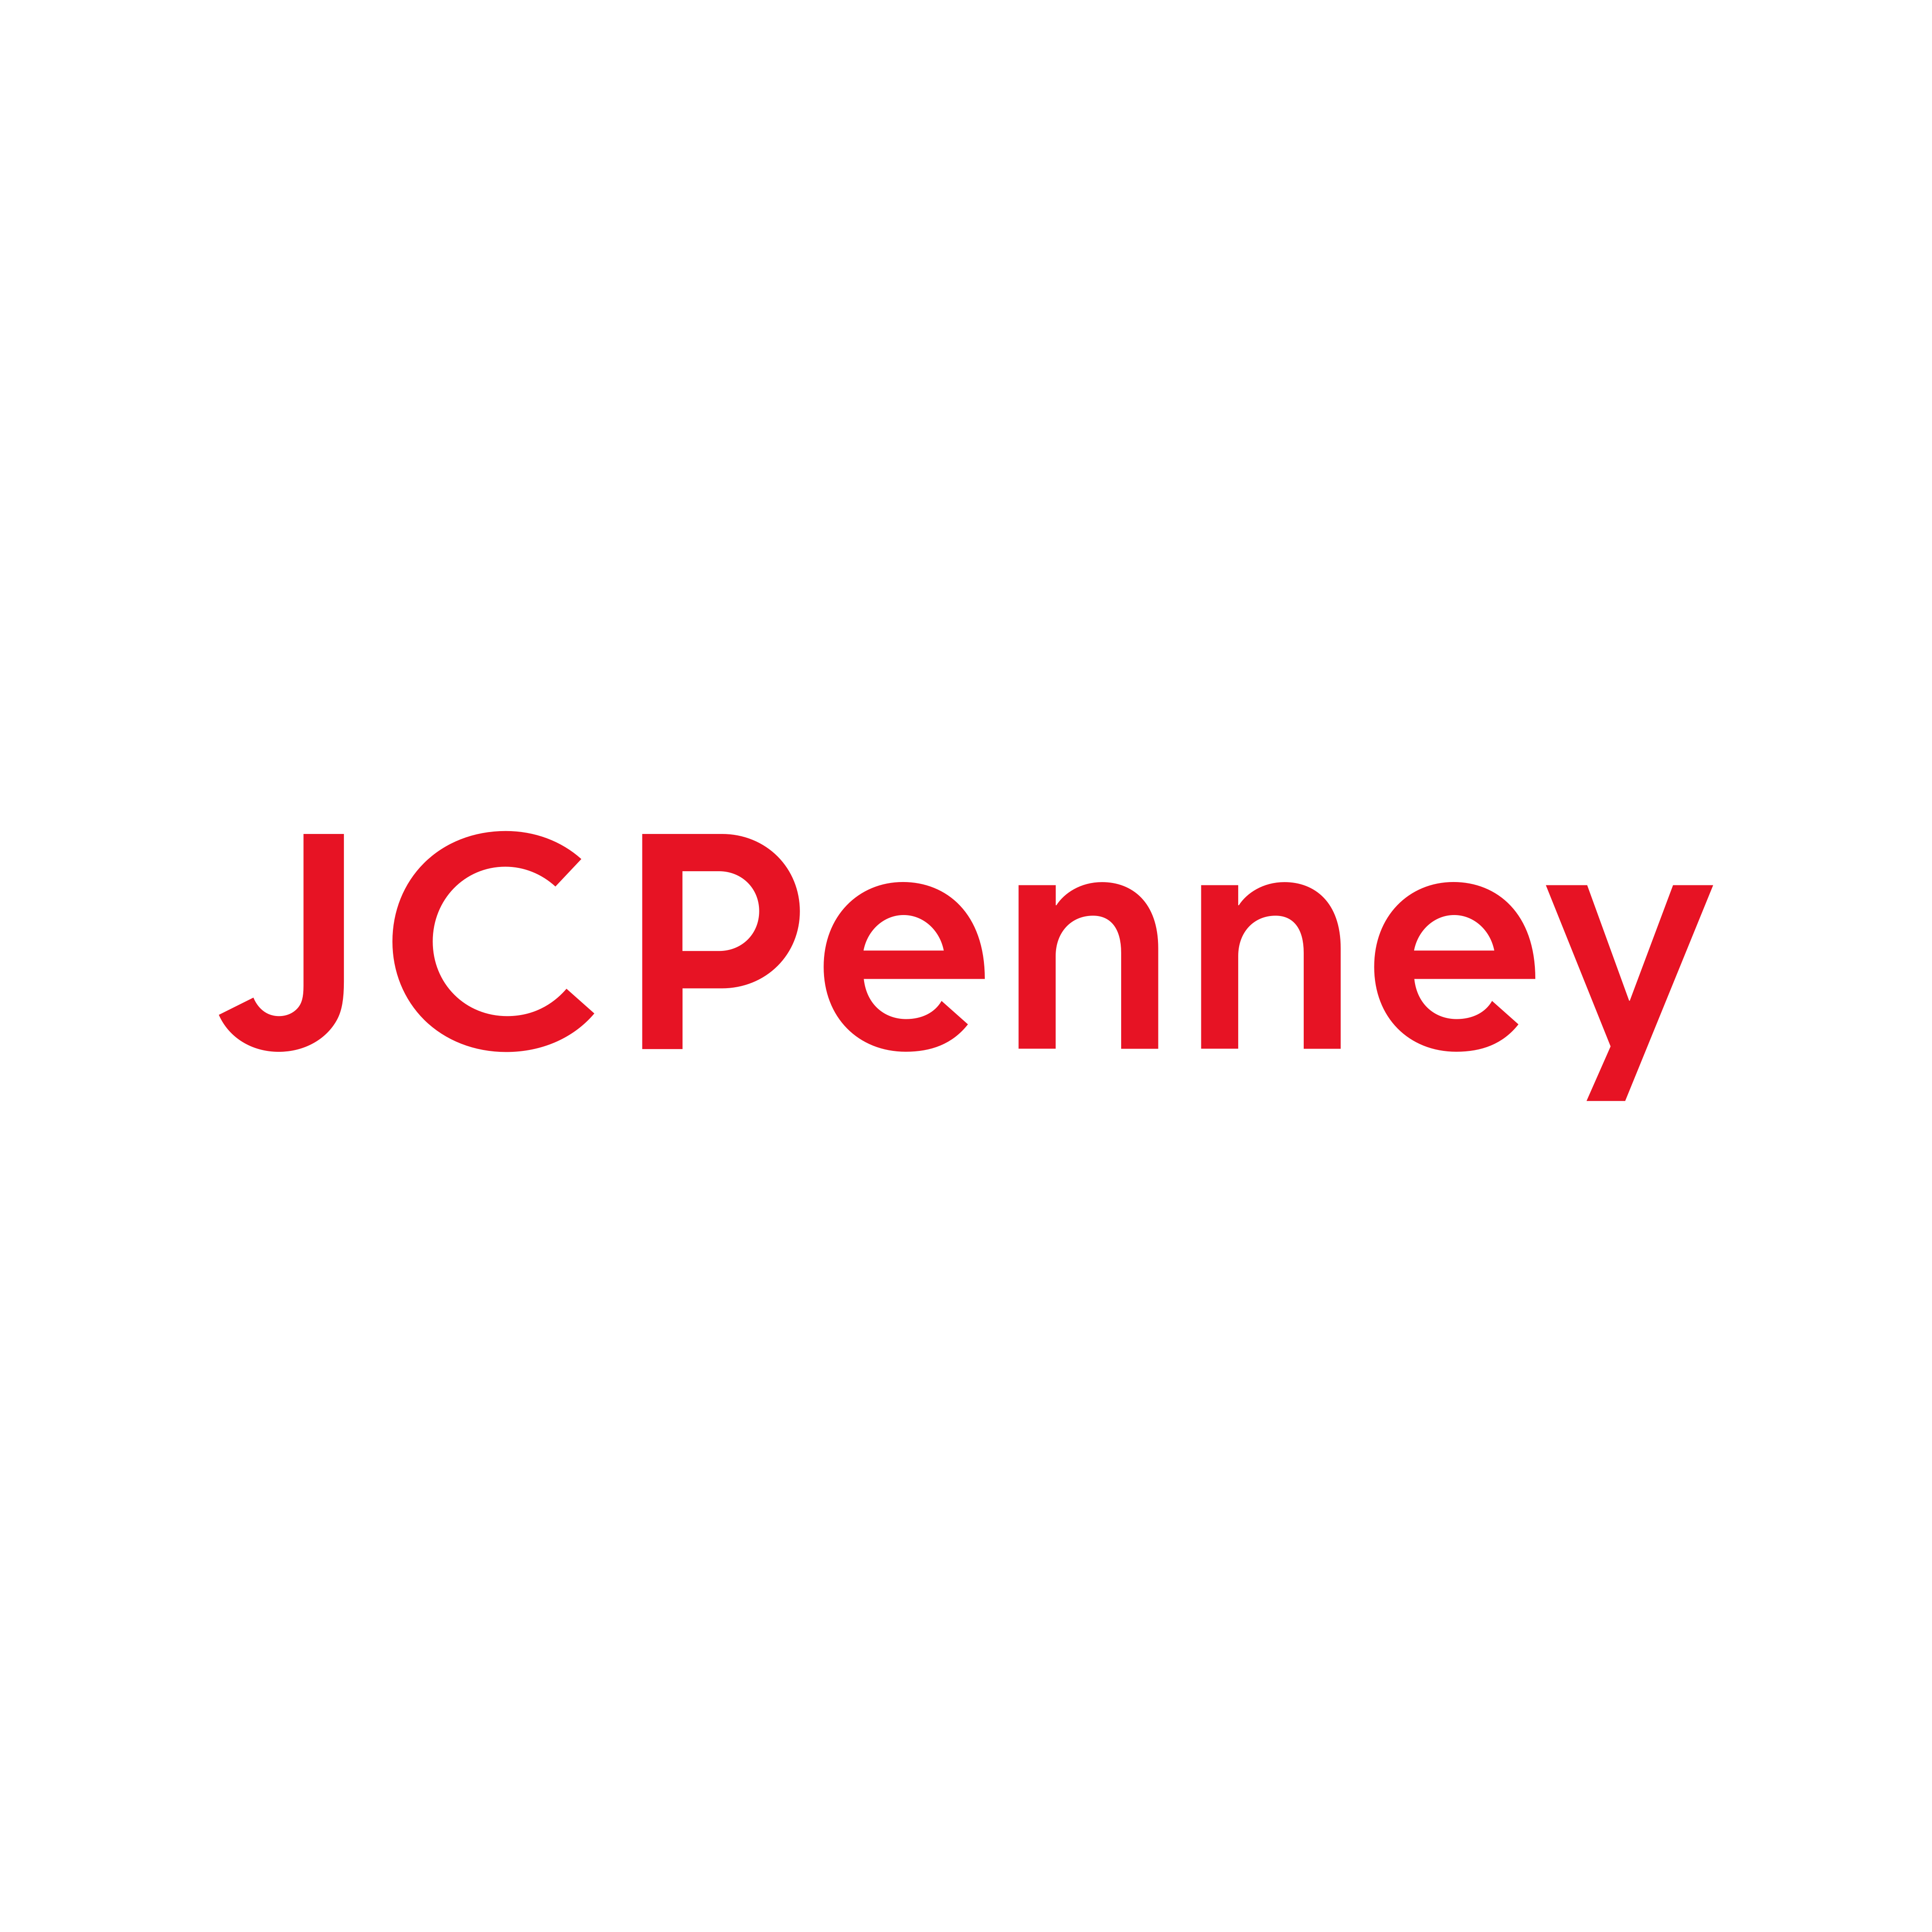 JCPenney Logo PNG.